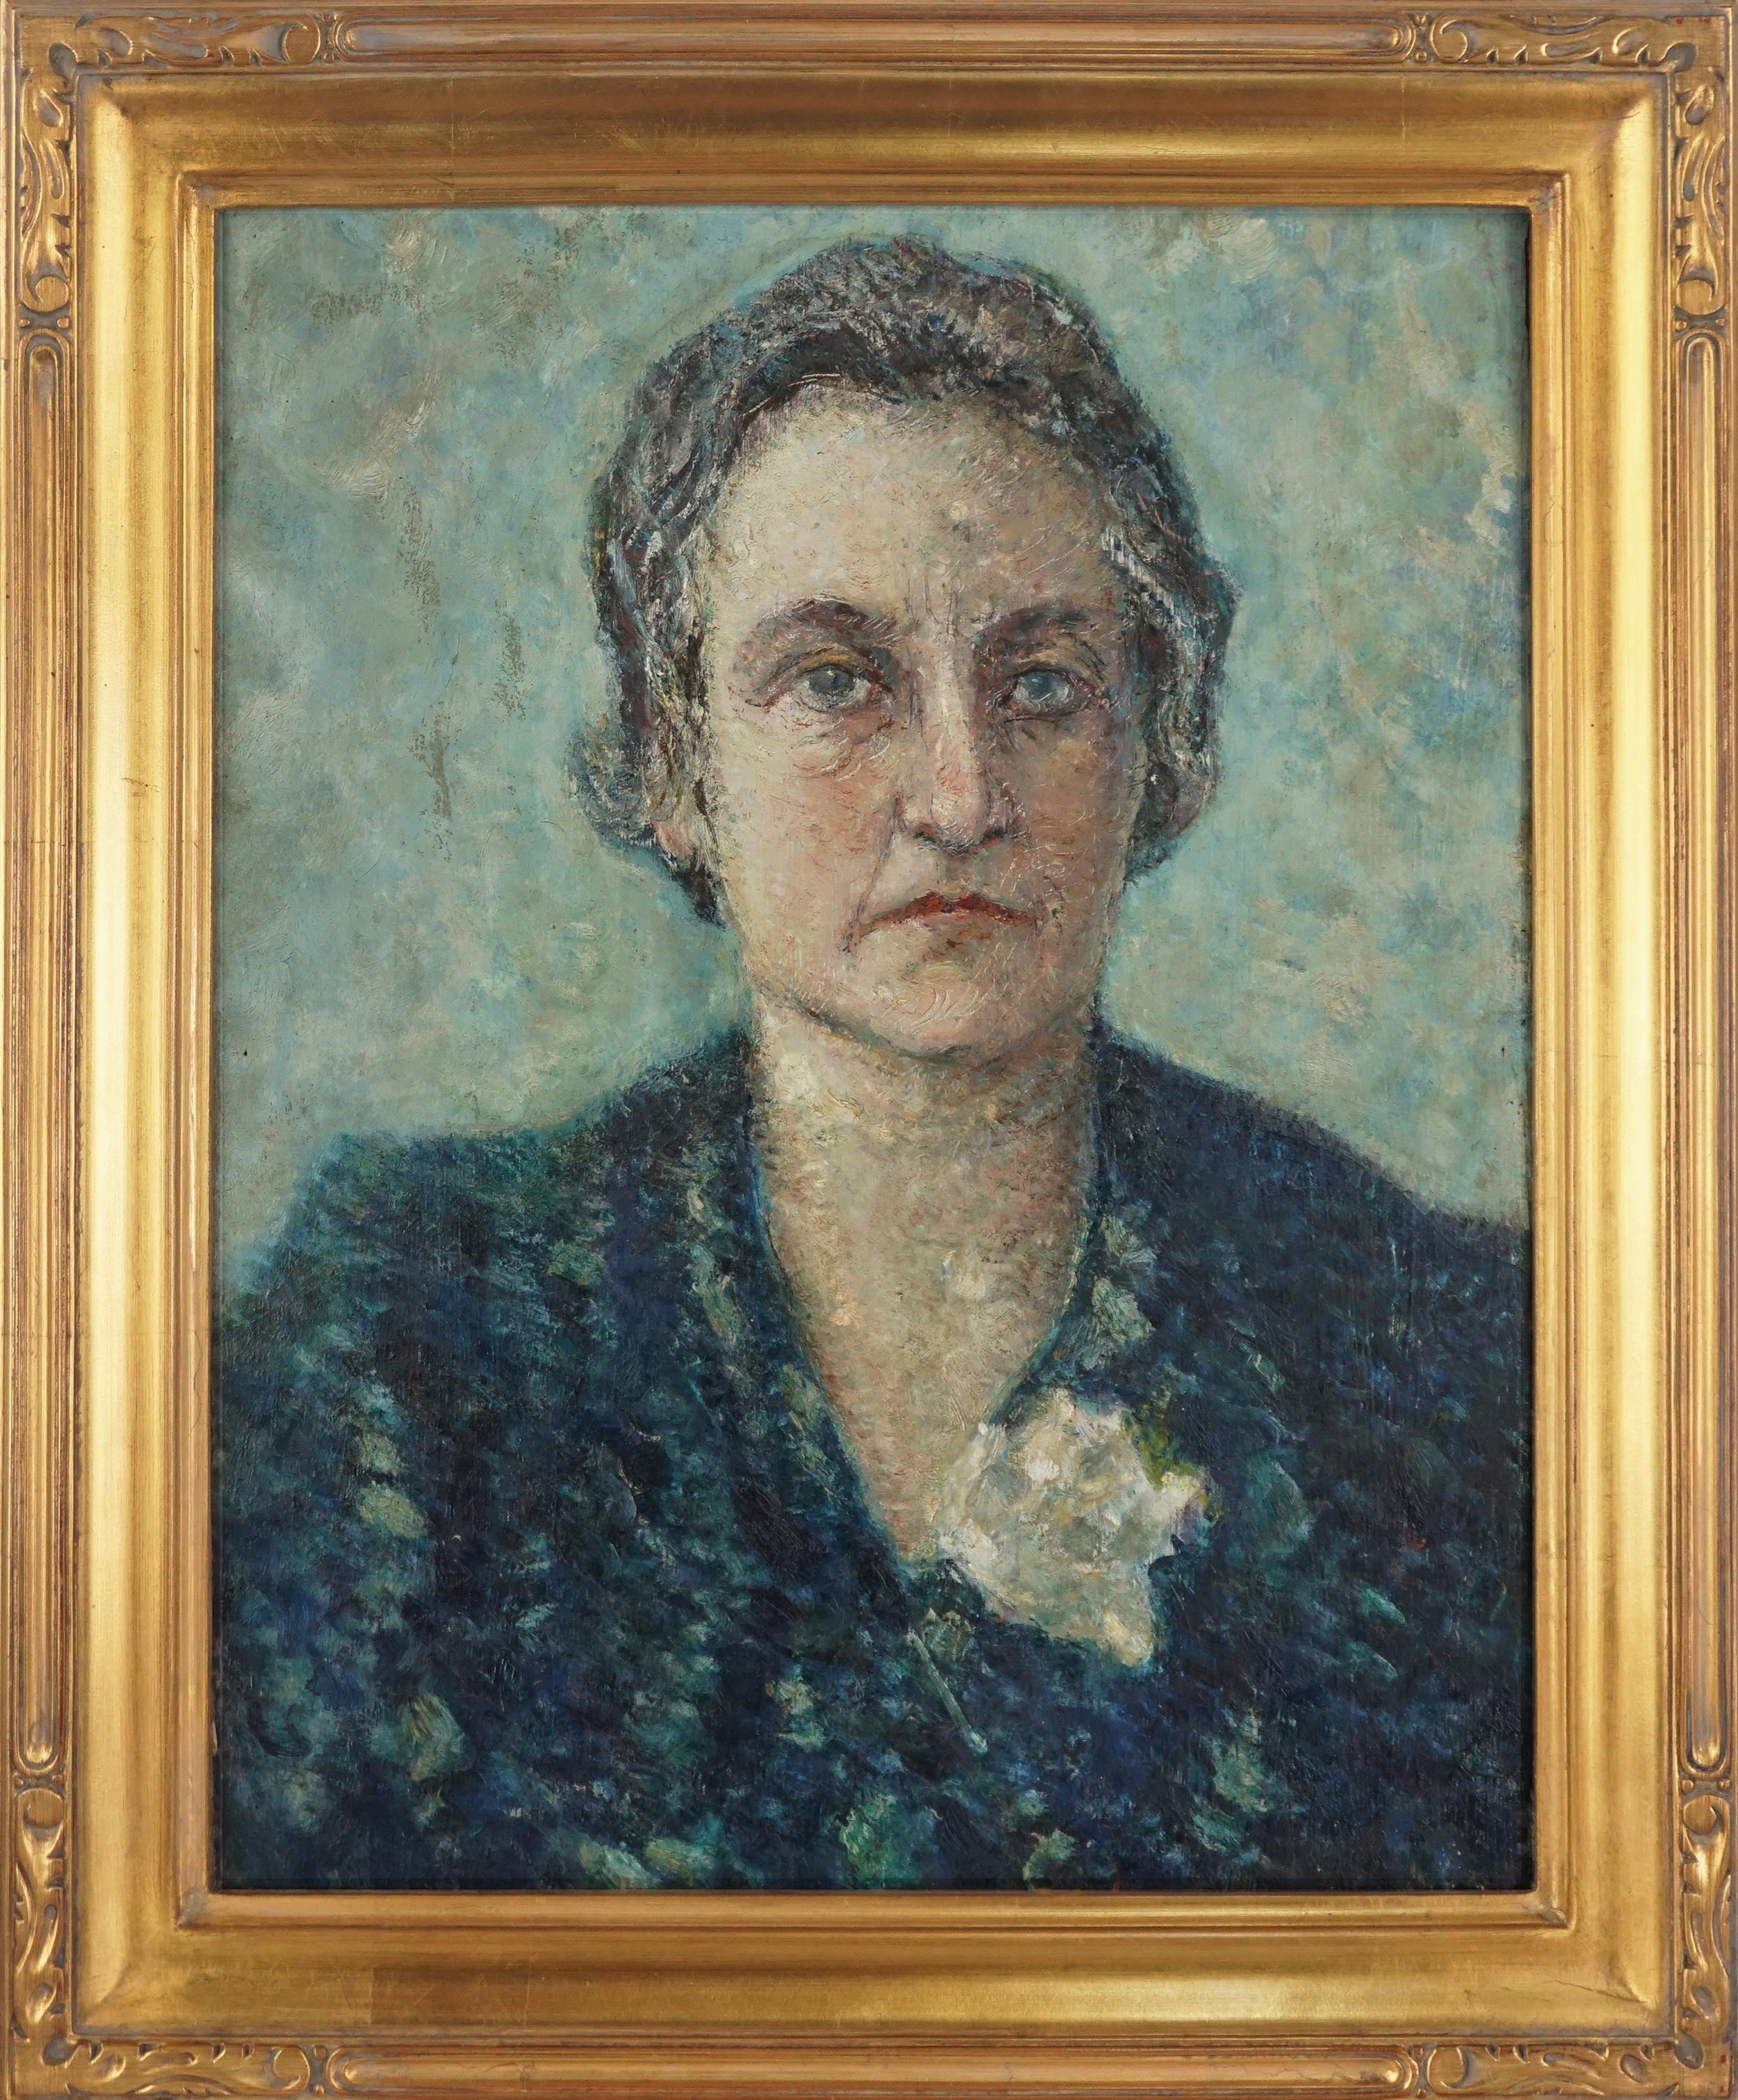 Raul Viviani Figurative Painting - 1950s Divisionist Style Portrait of Nonna -- Oil Painting on Board